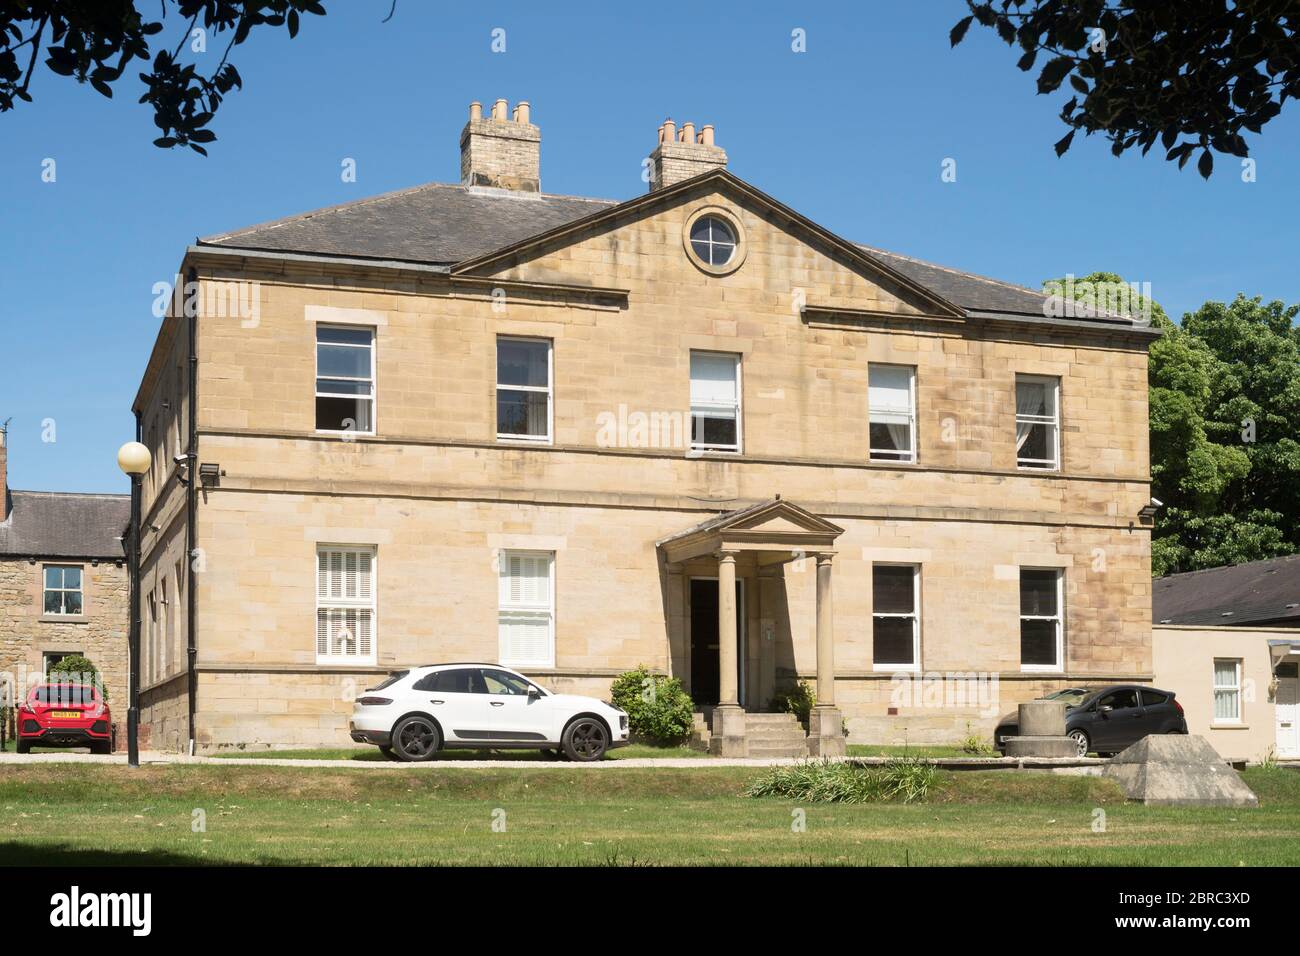 Usworth Hall a late 18th century listed stone building in Washington, Tyne and Wear, England, UK Stock Photo